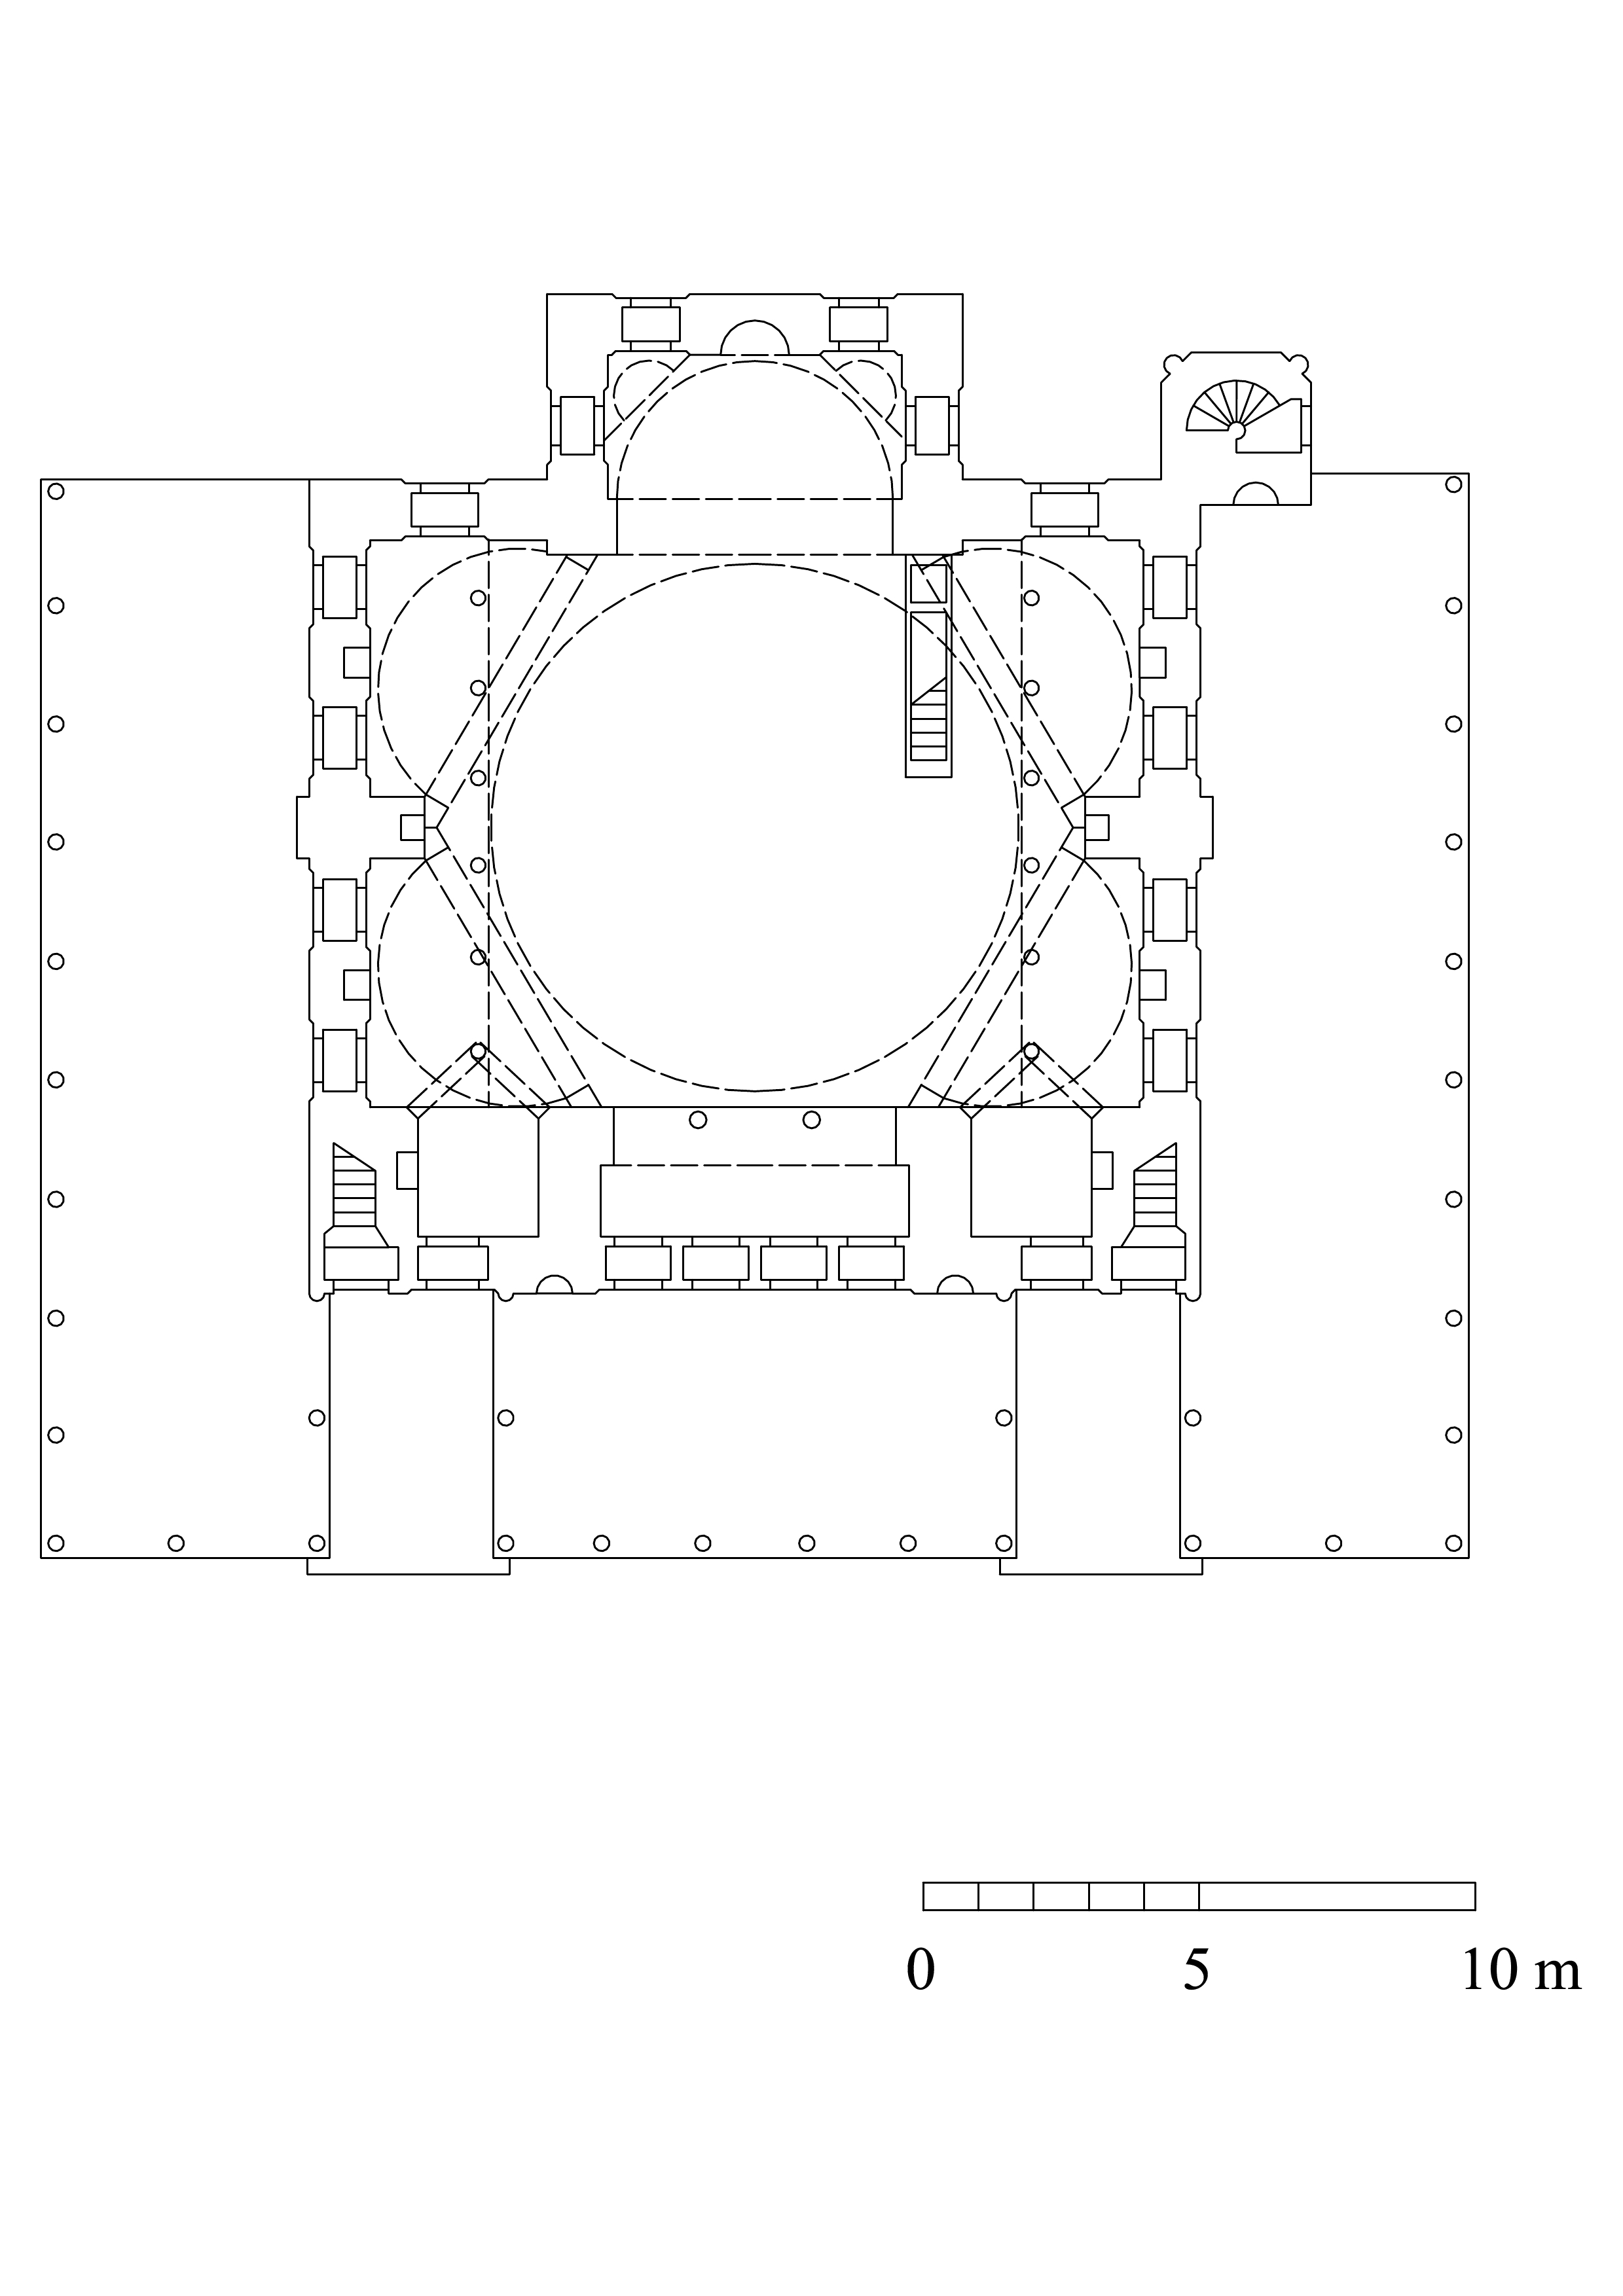 Ivaz Efendi Mosque - Floor plan with hypothetical reconstruction of wooden porticoes. DWG file in AutoCAD 2000 format. Click the download button to download a zipped file containing the .dwg file.